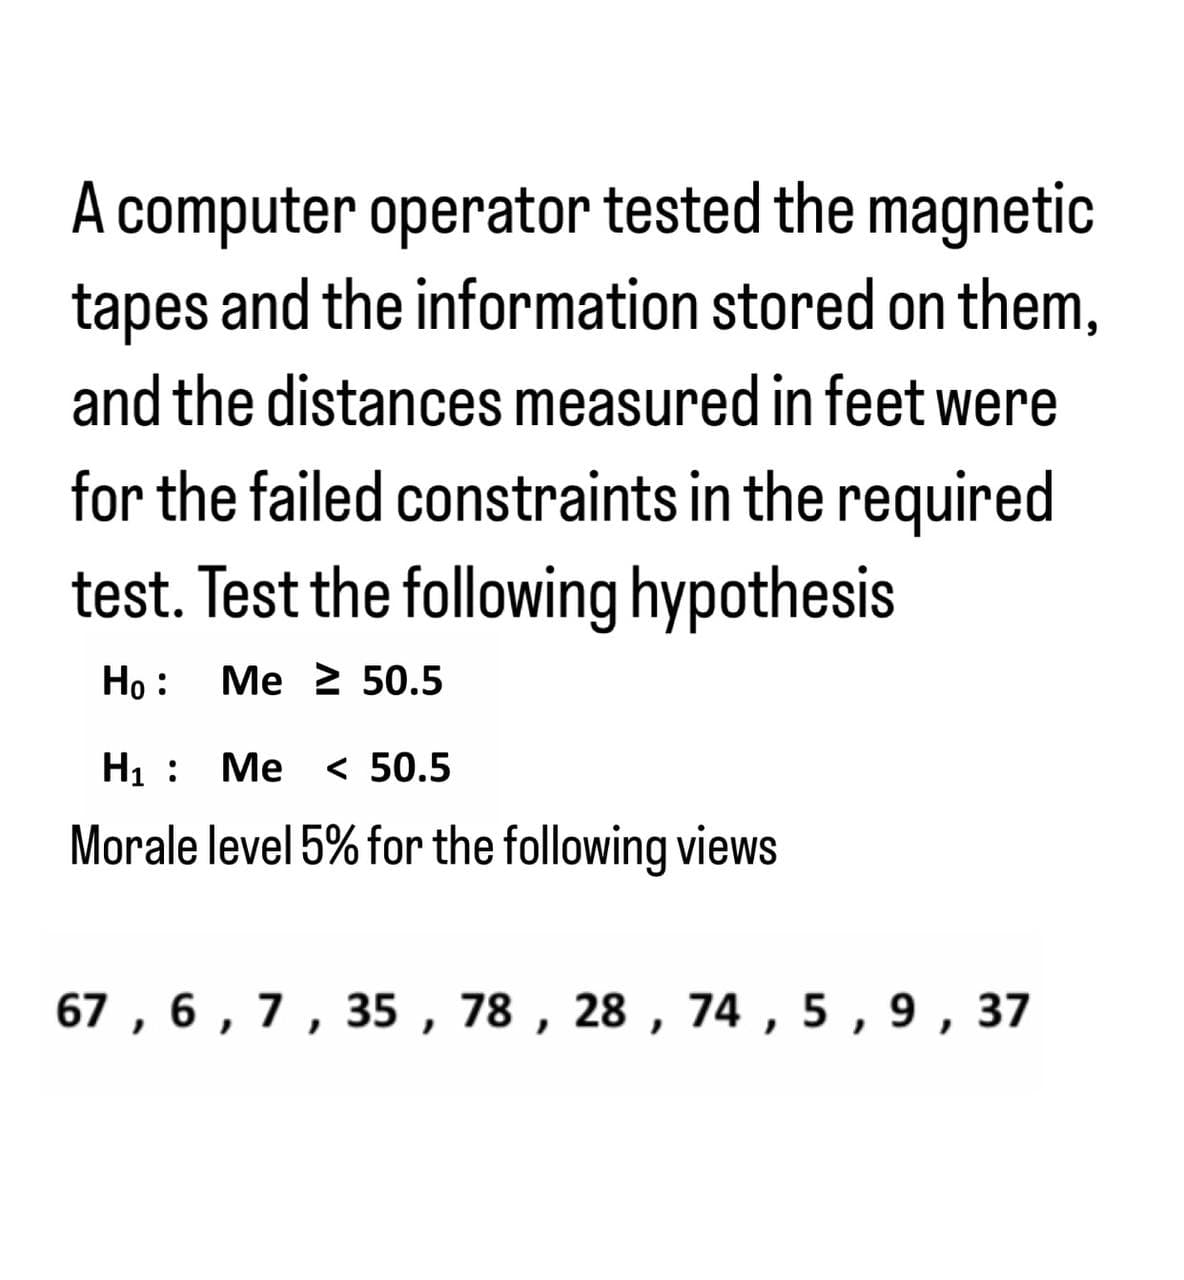 A computer operator tested the magnetic
tapes and the information stored on them,
and the distances measured in feet were
for the failed constraints in the required
test. Test the following hypothesis
Ho :
Me 250.5
H₁ :
Me < 50.5
Morale level 5% for the following views
67, 6, 7, 35, 78, 28, 74, 5, 9, 37